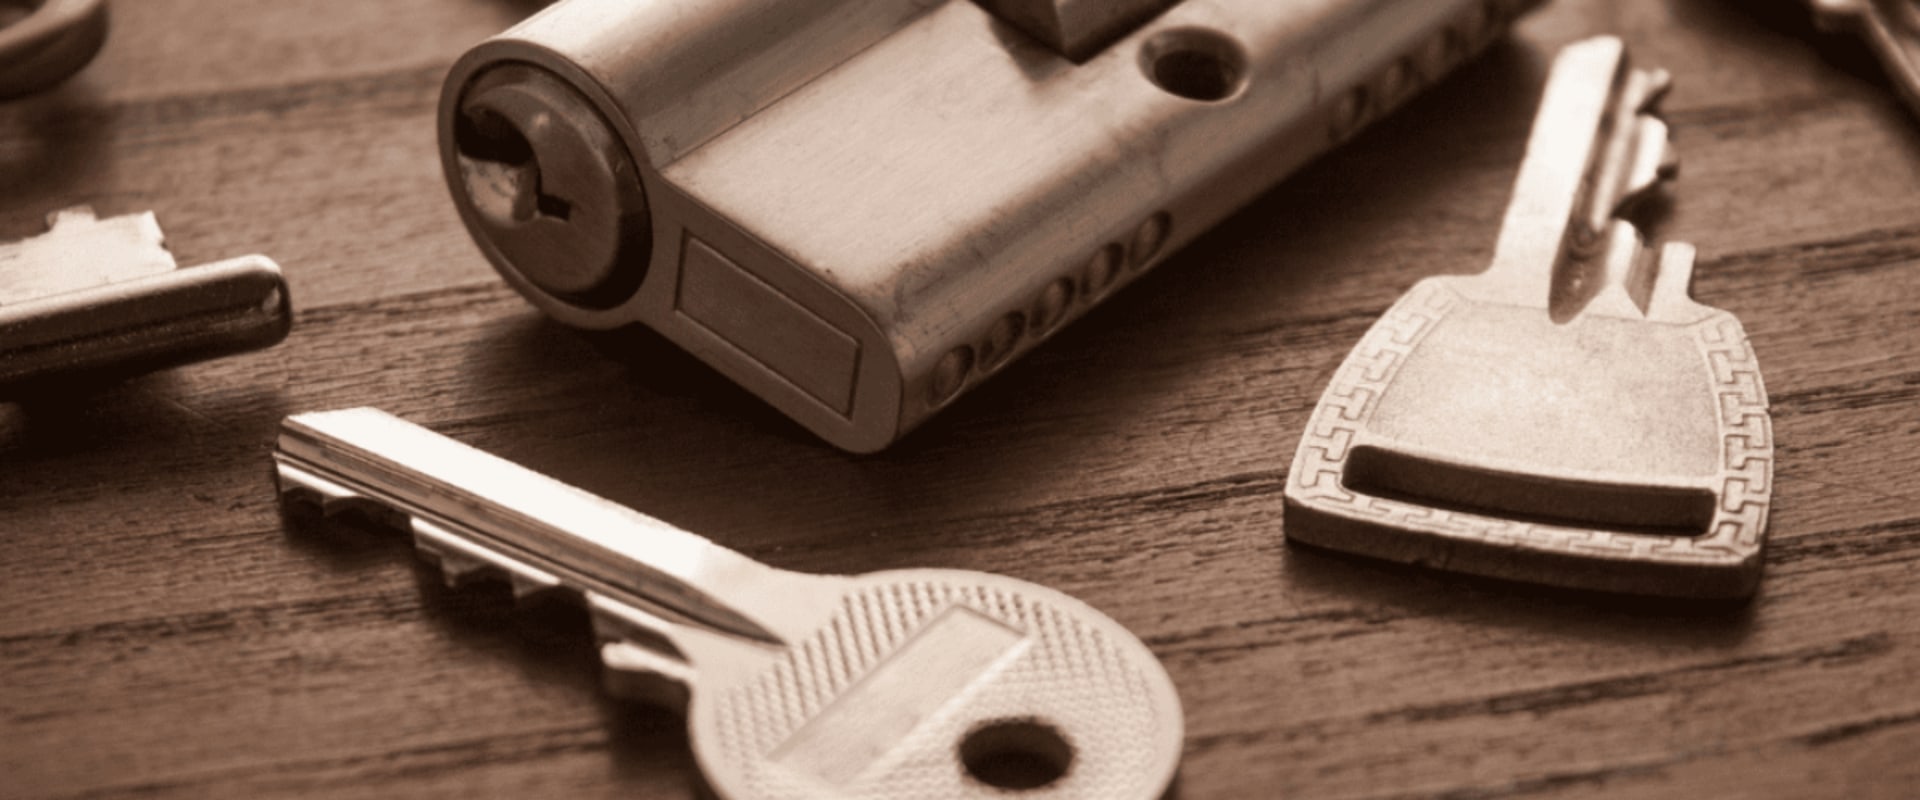 How Long Does It Take for a Locksmith to Make a New Key?